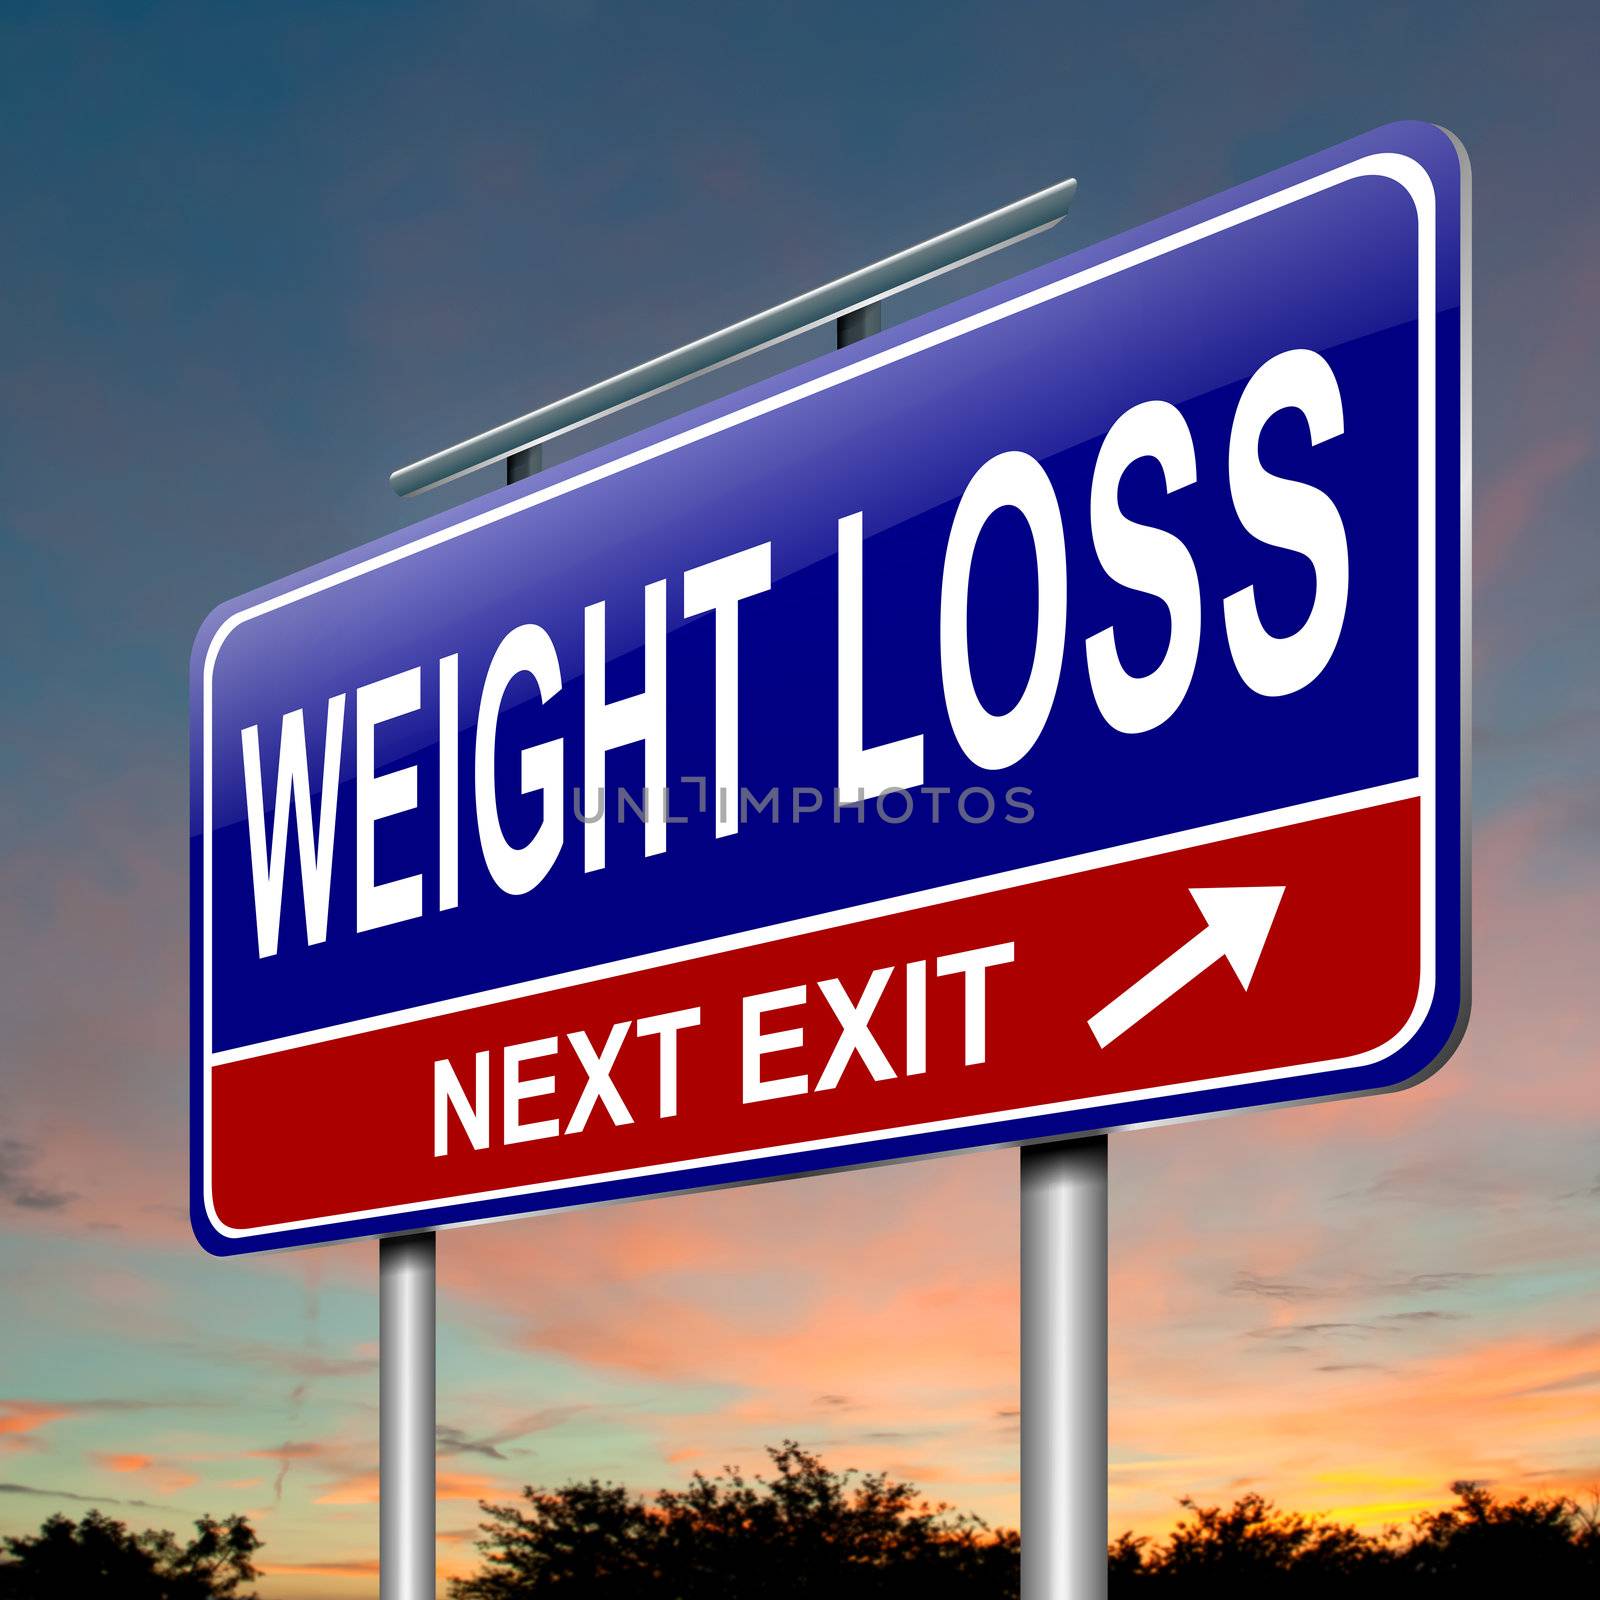 Illustration depicting a roadsign with a weight loss concept. Sunset sky background.